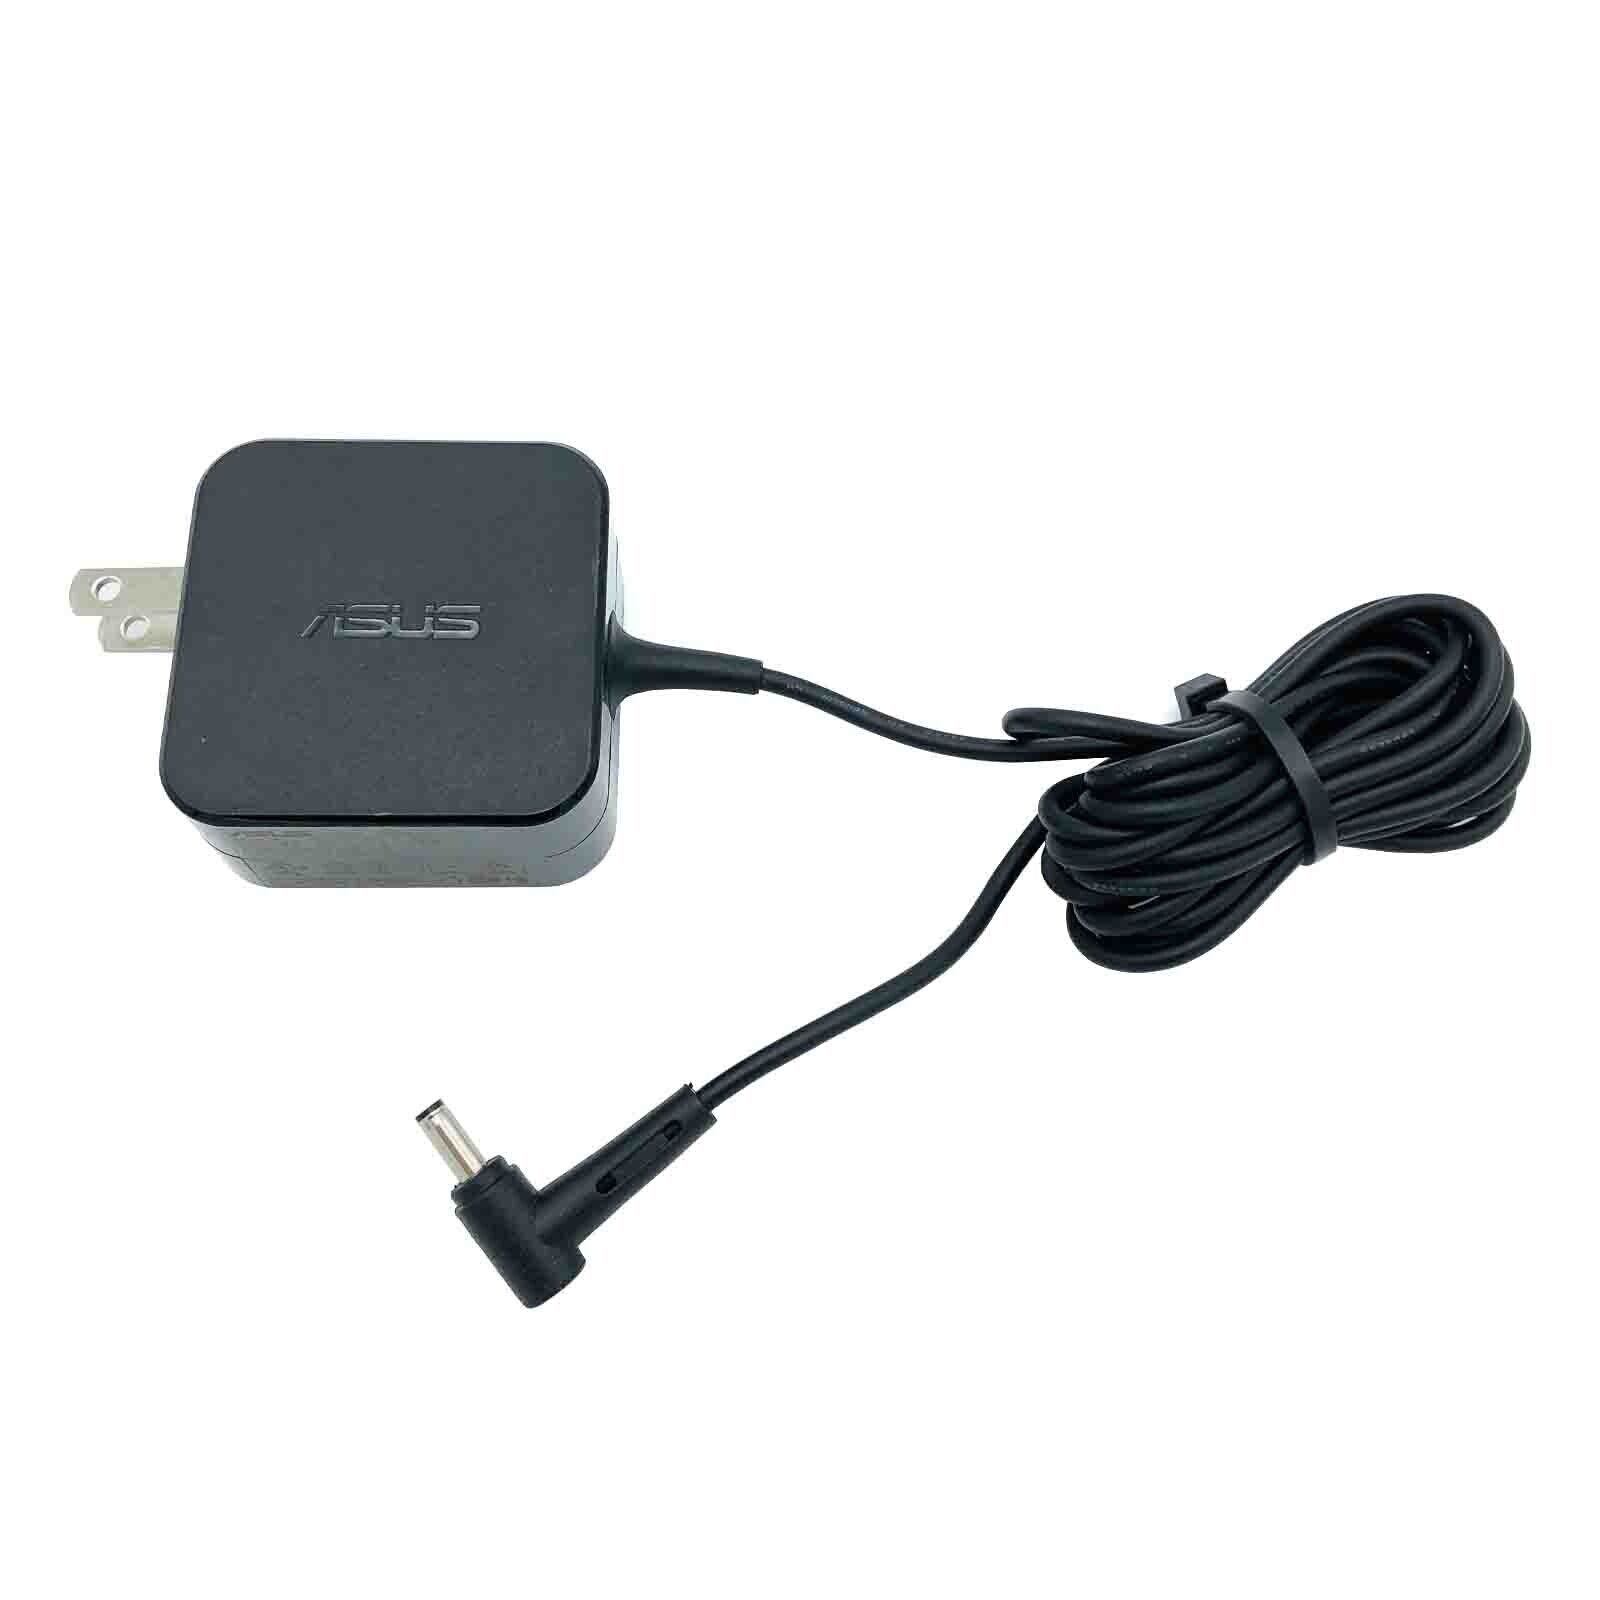 Genuine Asus AC DC Wall Adapter For WiFi Router AC1750 AC2600 AC2900 RT-AC1900P